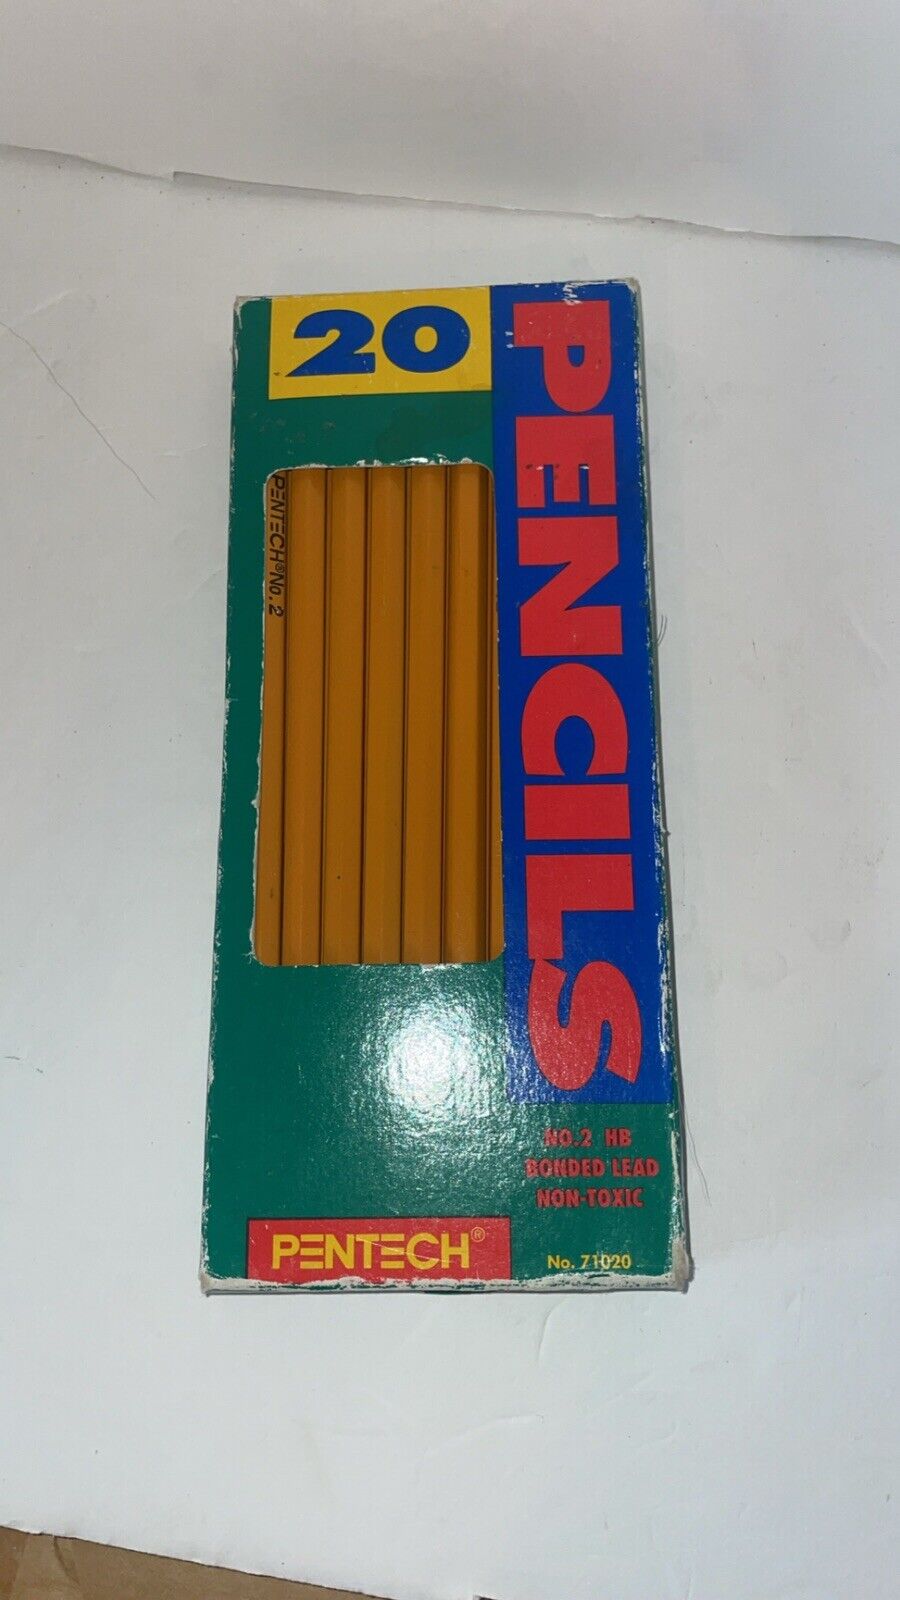 Vintage 1995 Pentech no. 2 Yellow Wood Pencils, #71020, Pack Of 14. Opened